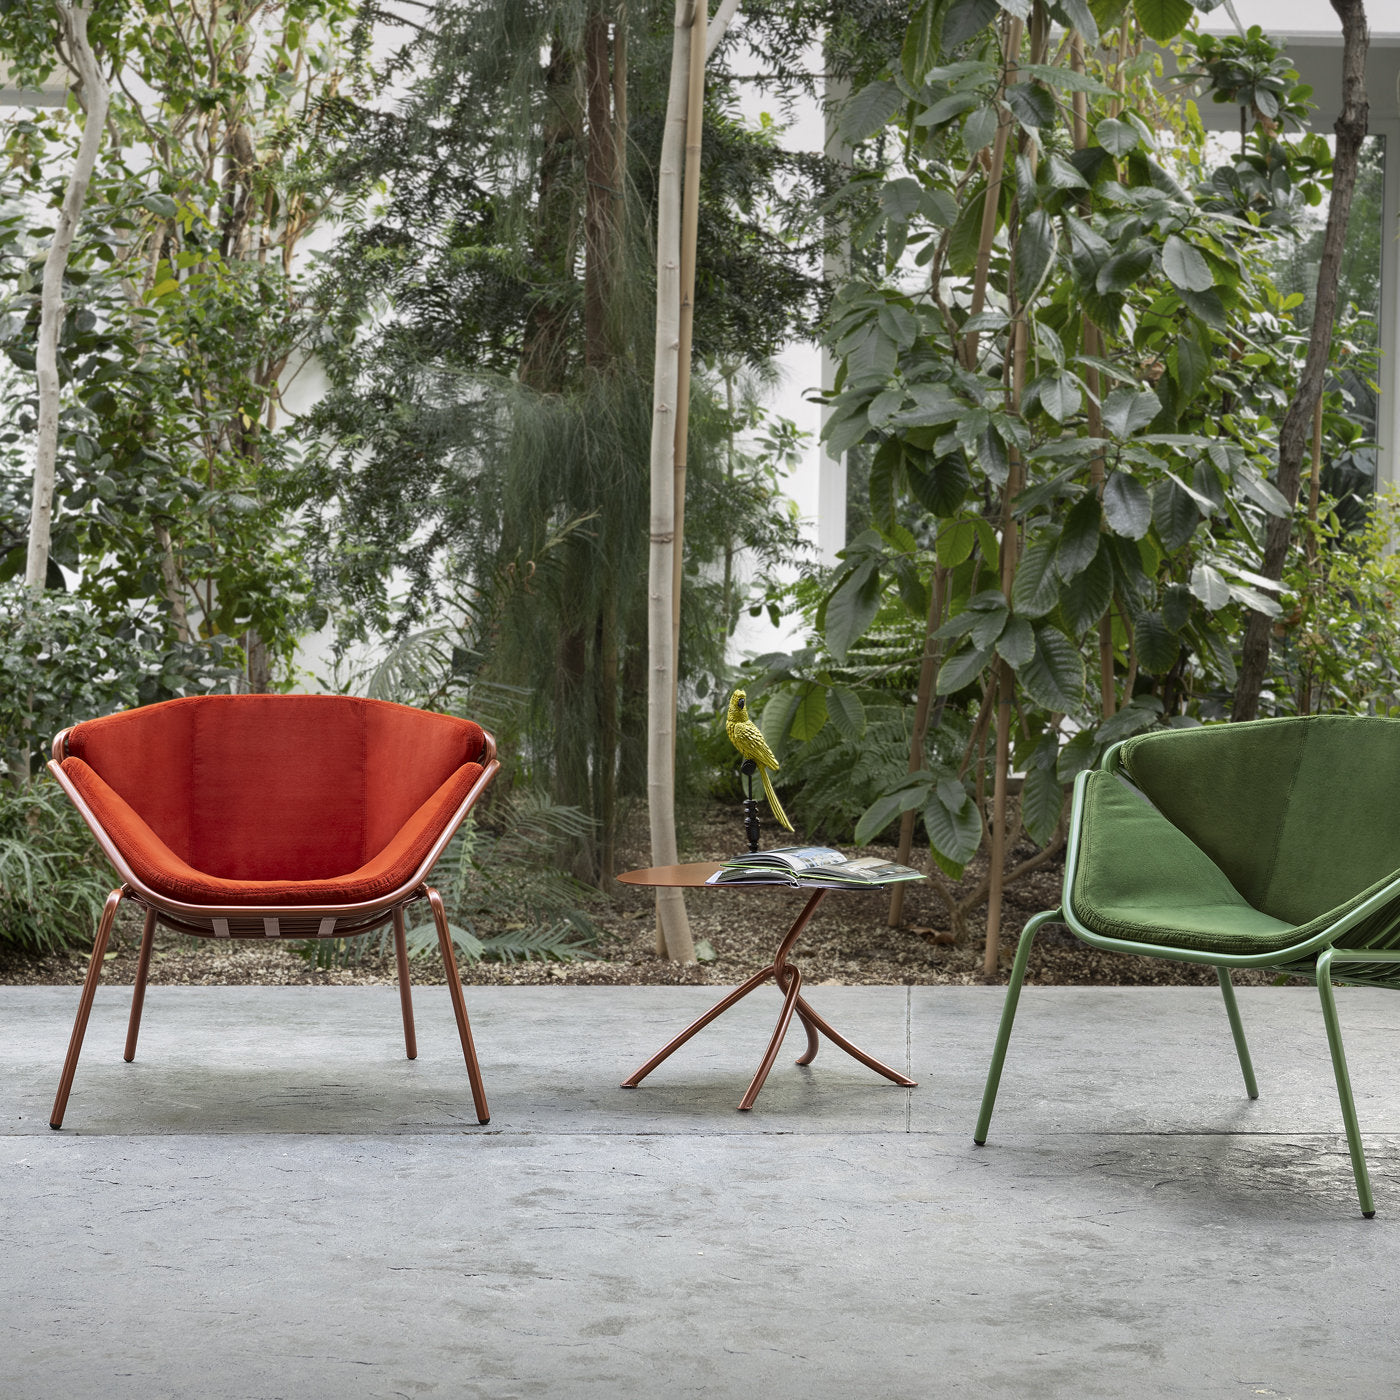 Skin Lounge Red Outdoor Chair By Giacomo Cattani - Alternative view 1